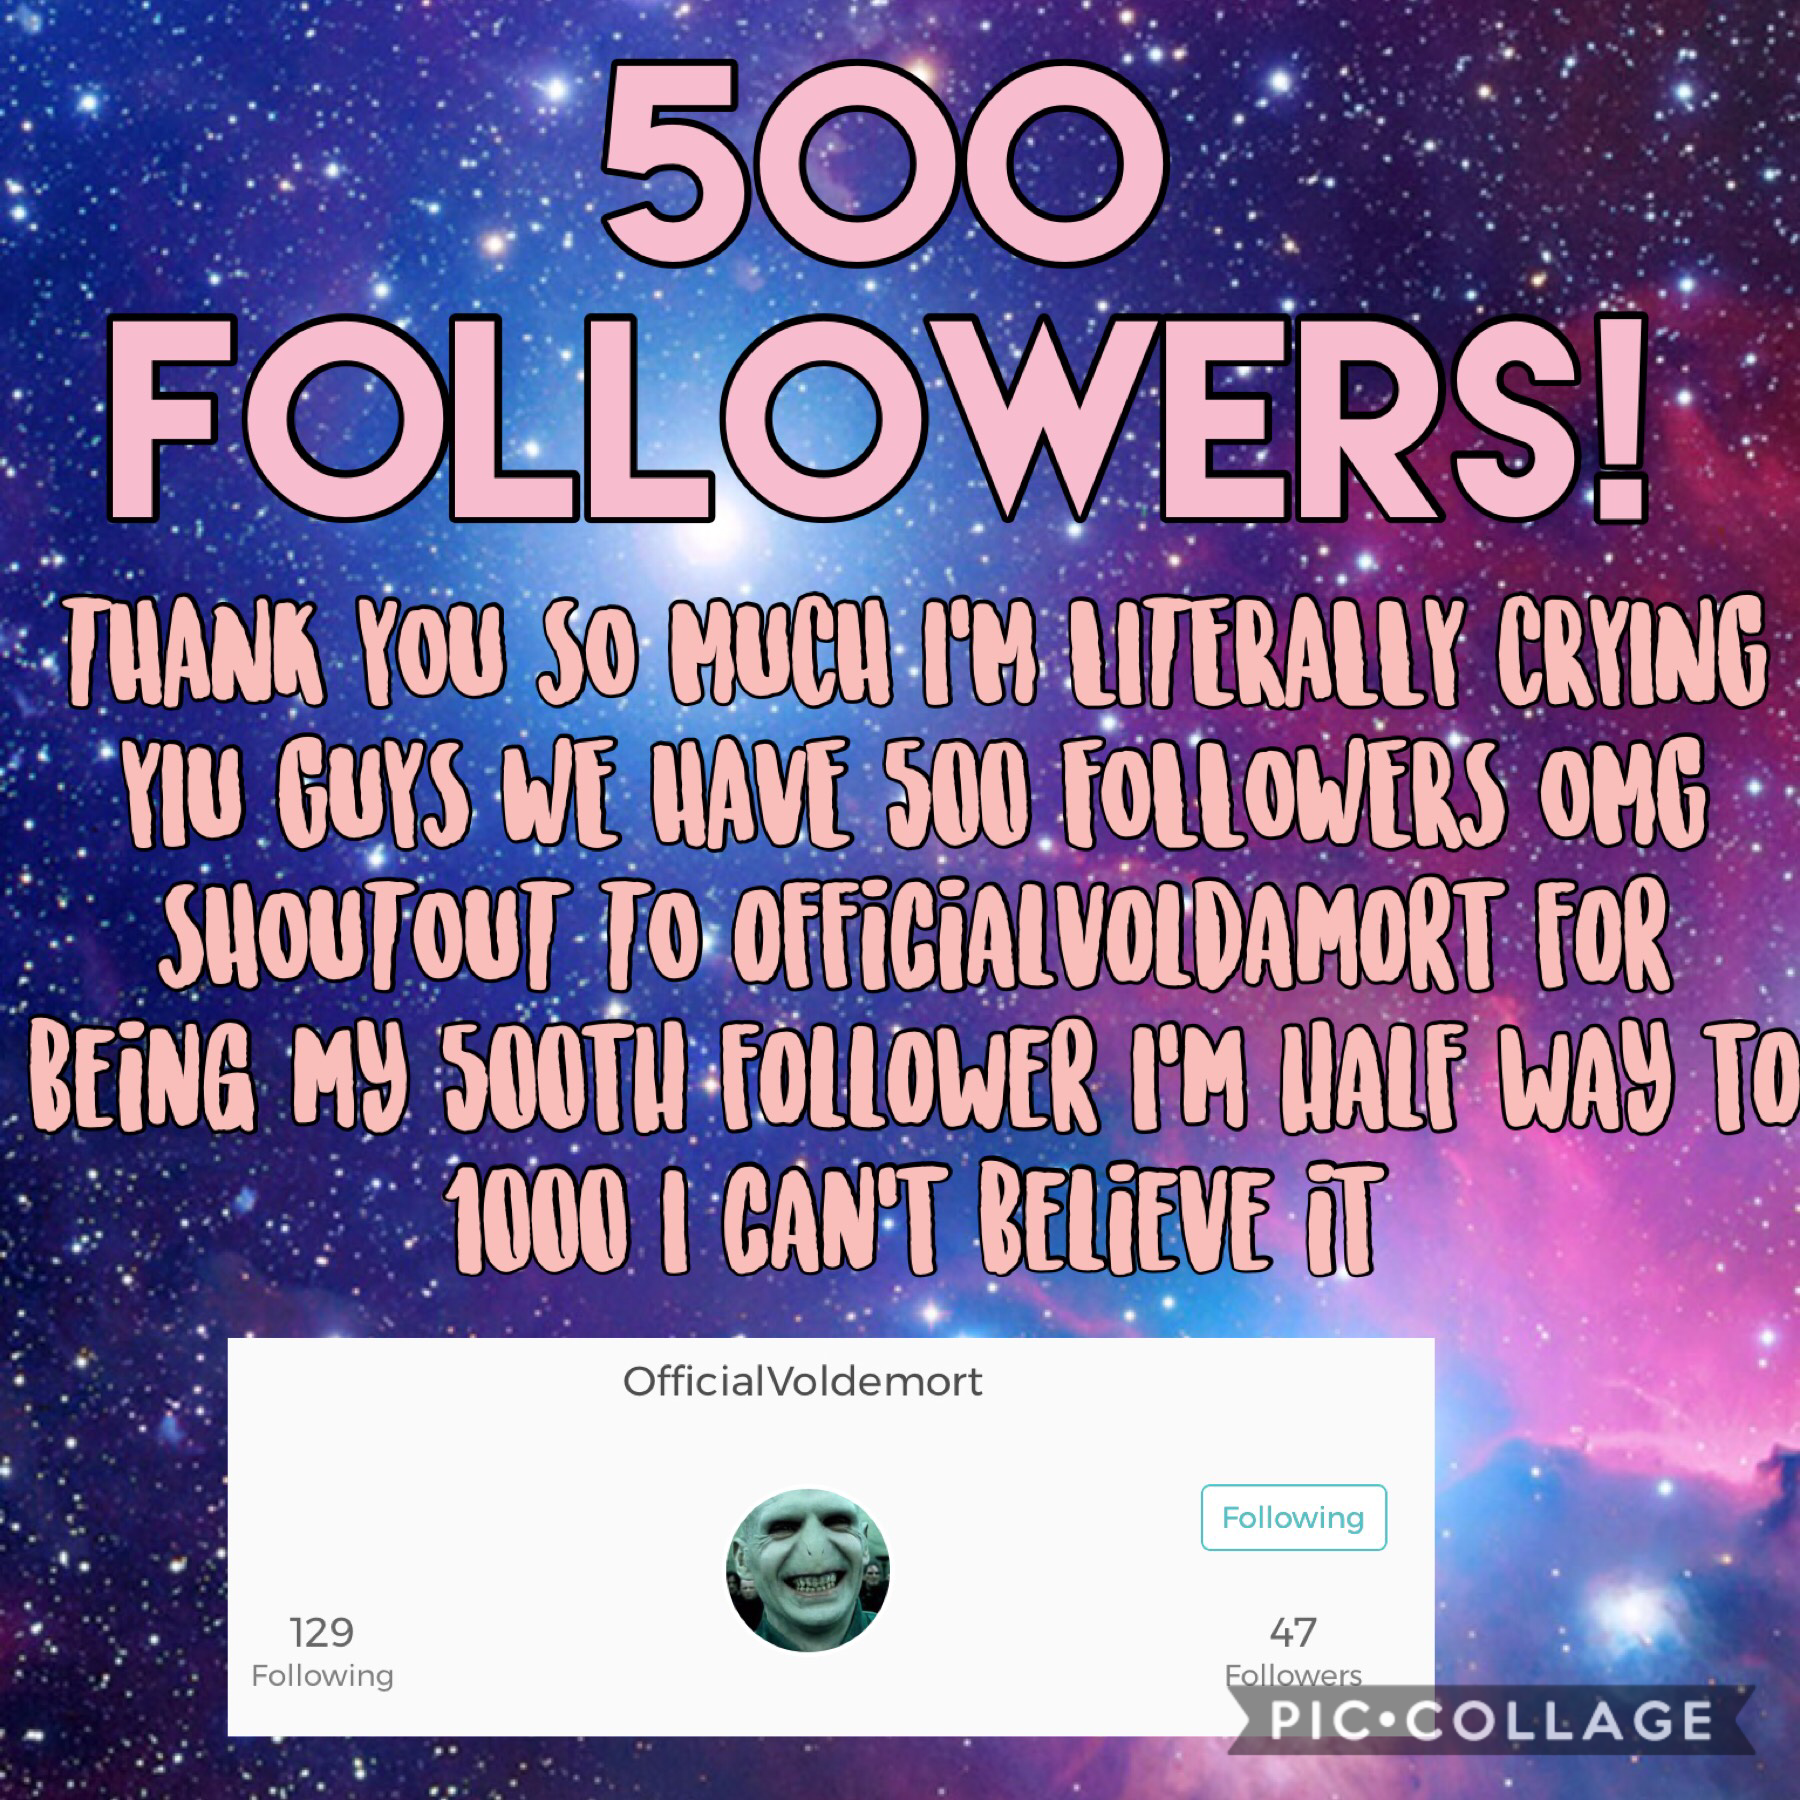 Thank you so much shoutout to everyone of you especially officalvoldamort 💖😘👍